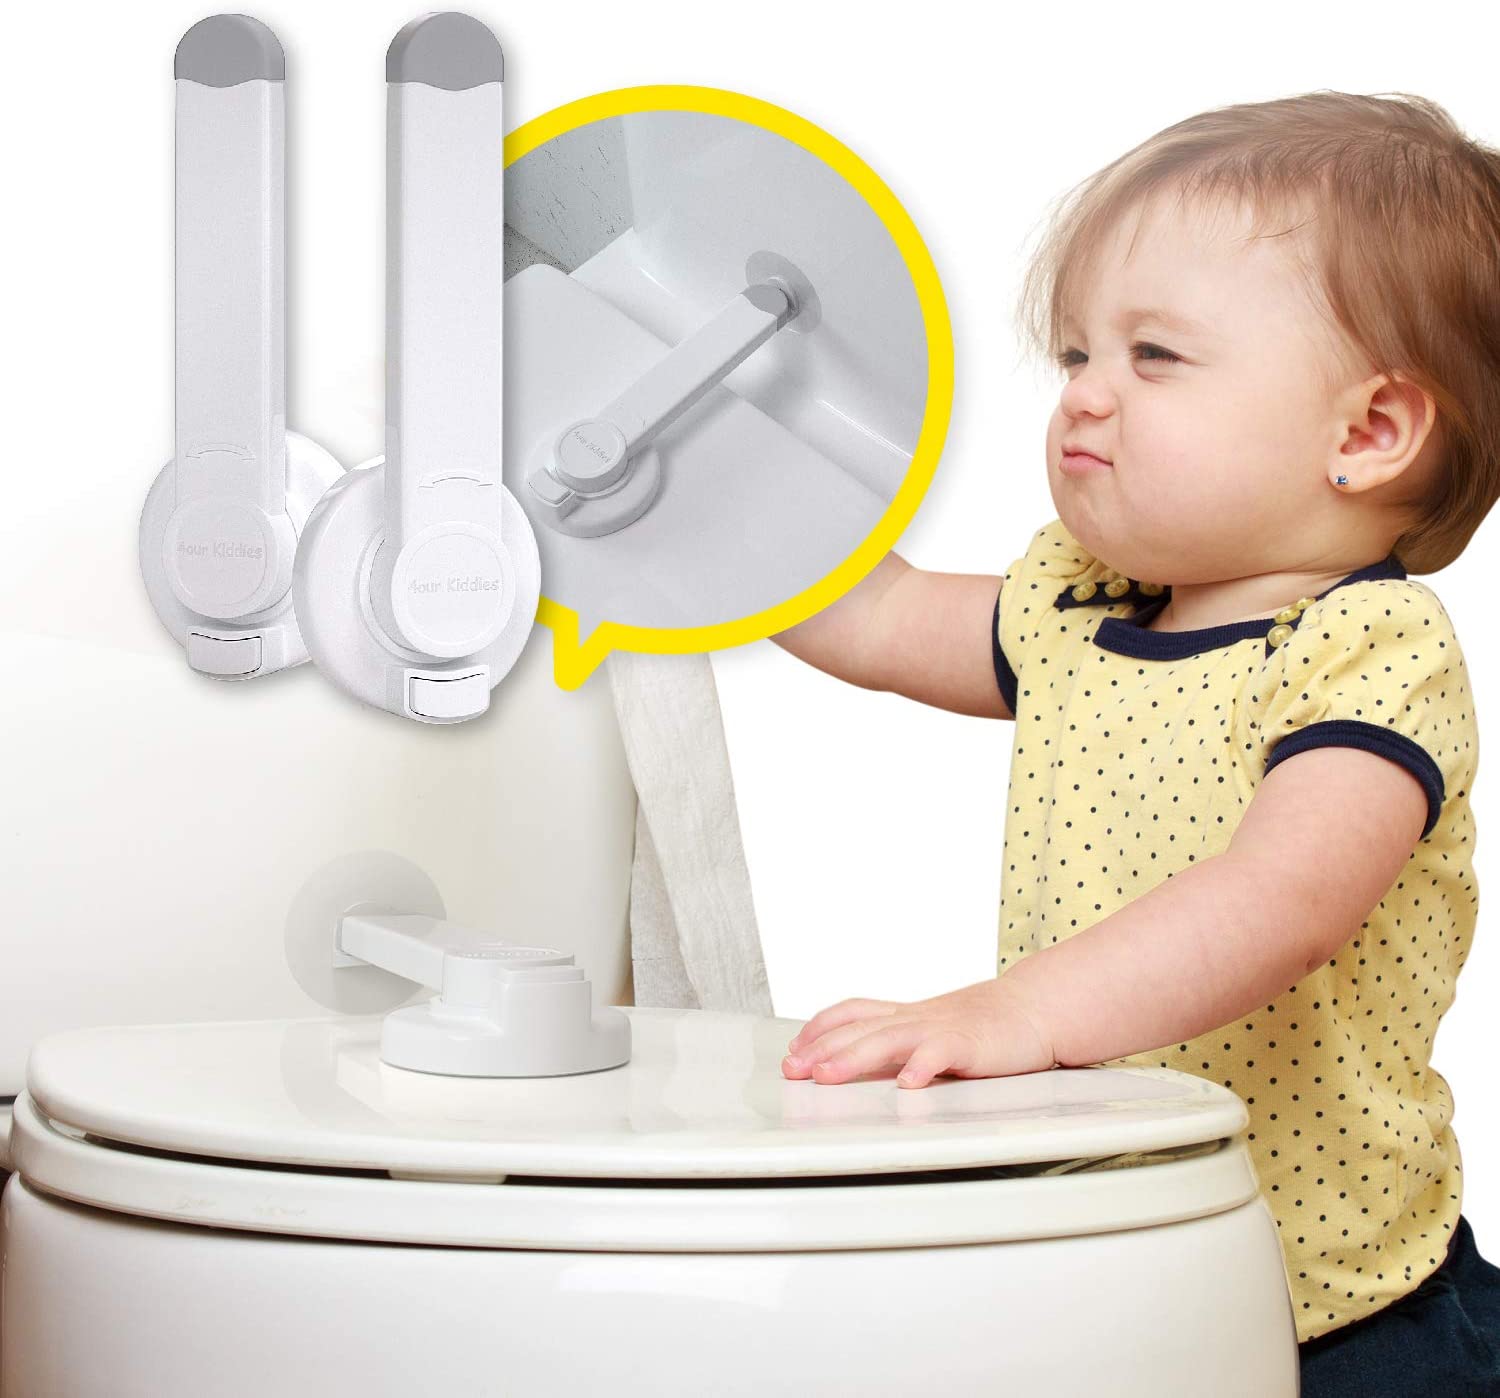 babyproof products - toilet bowl lock